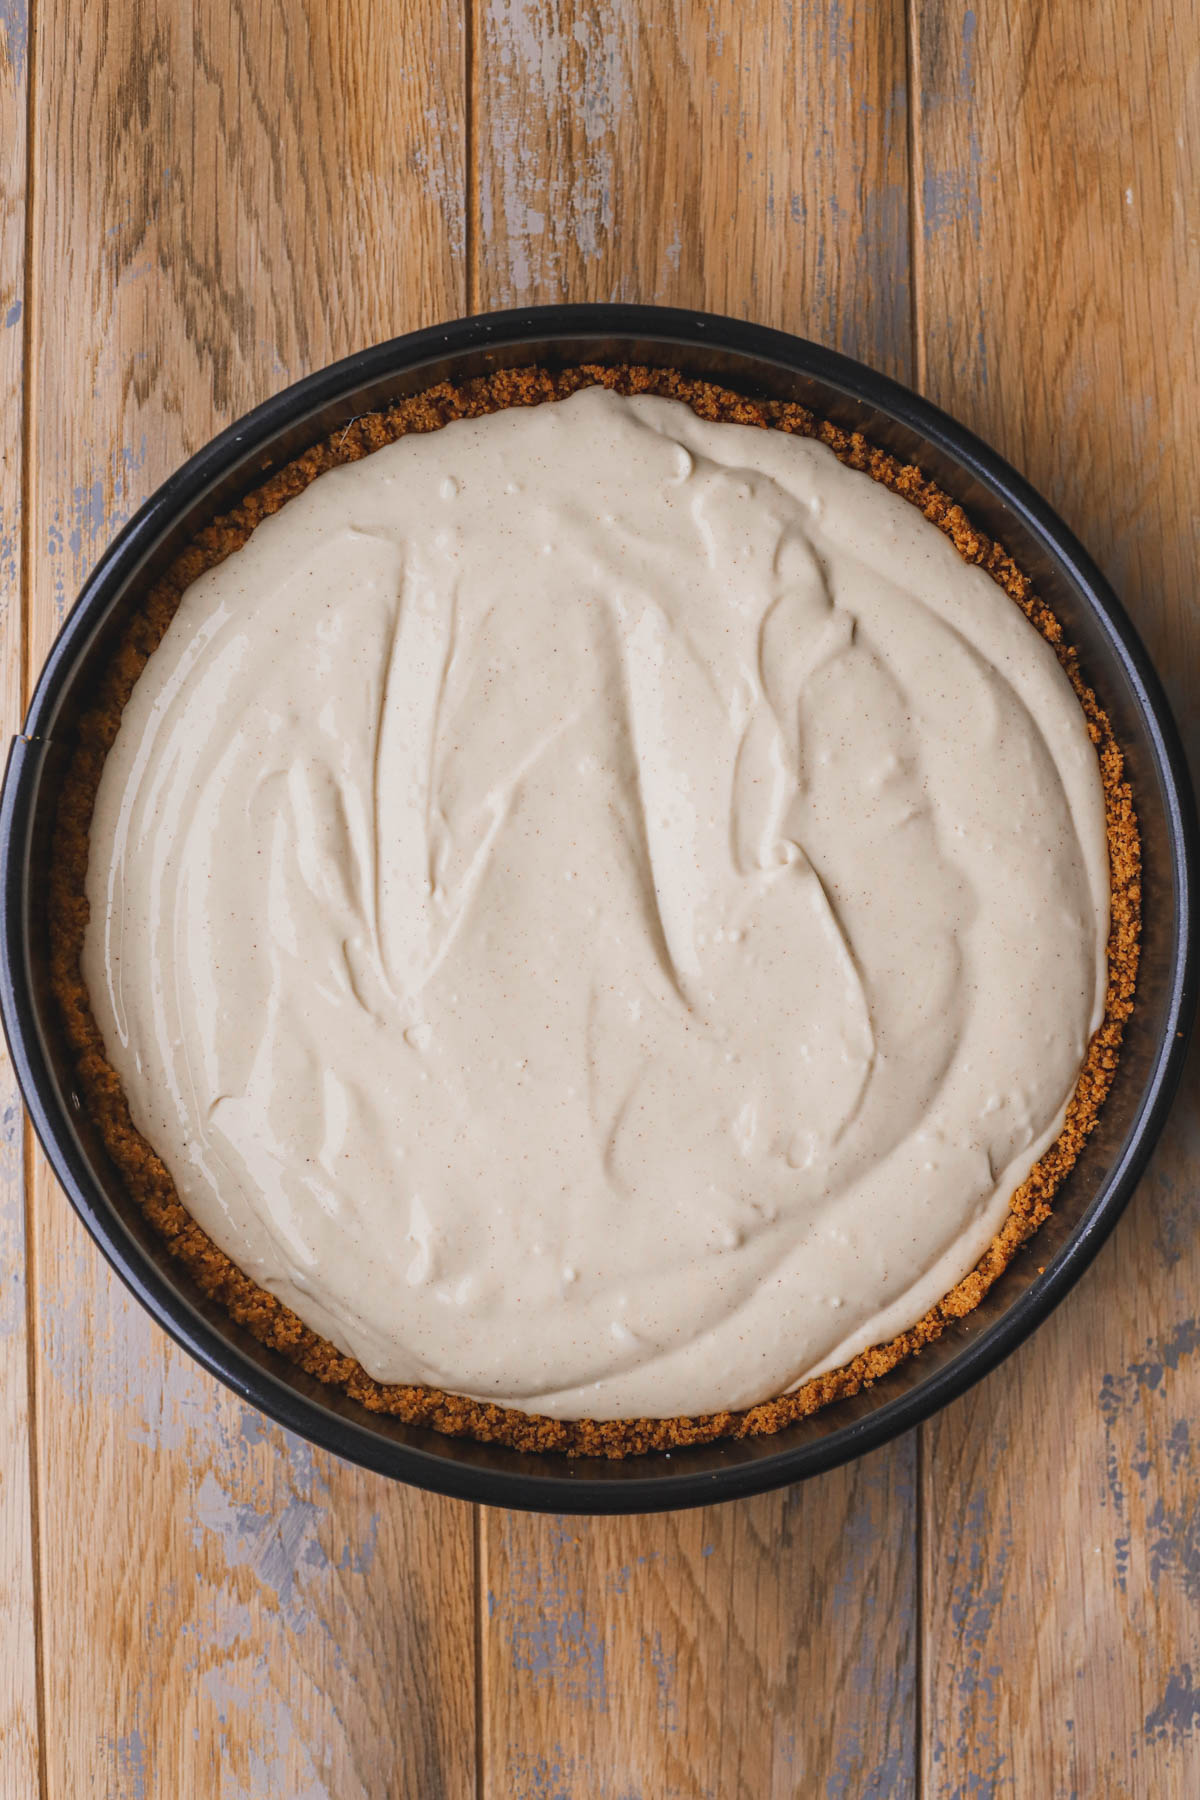 Baked graham cracker crust filled with cheesecake batter.  